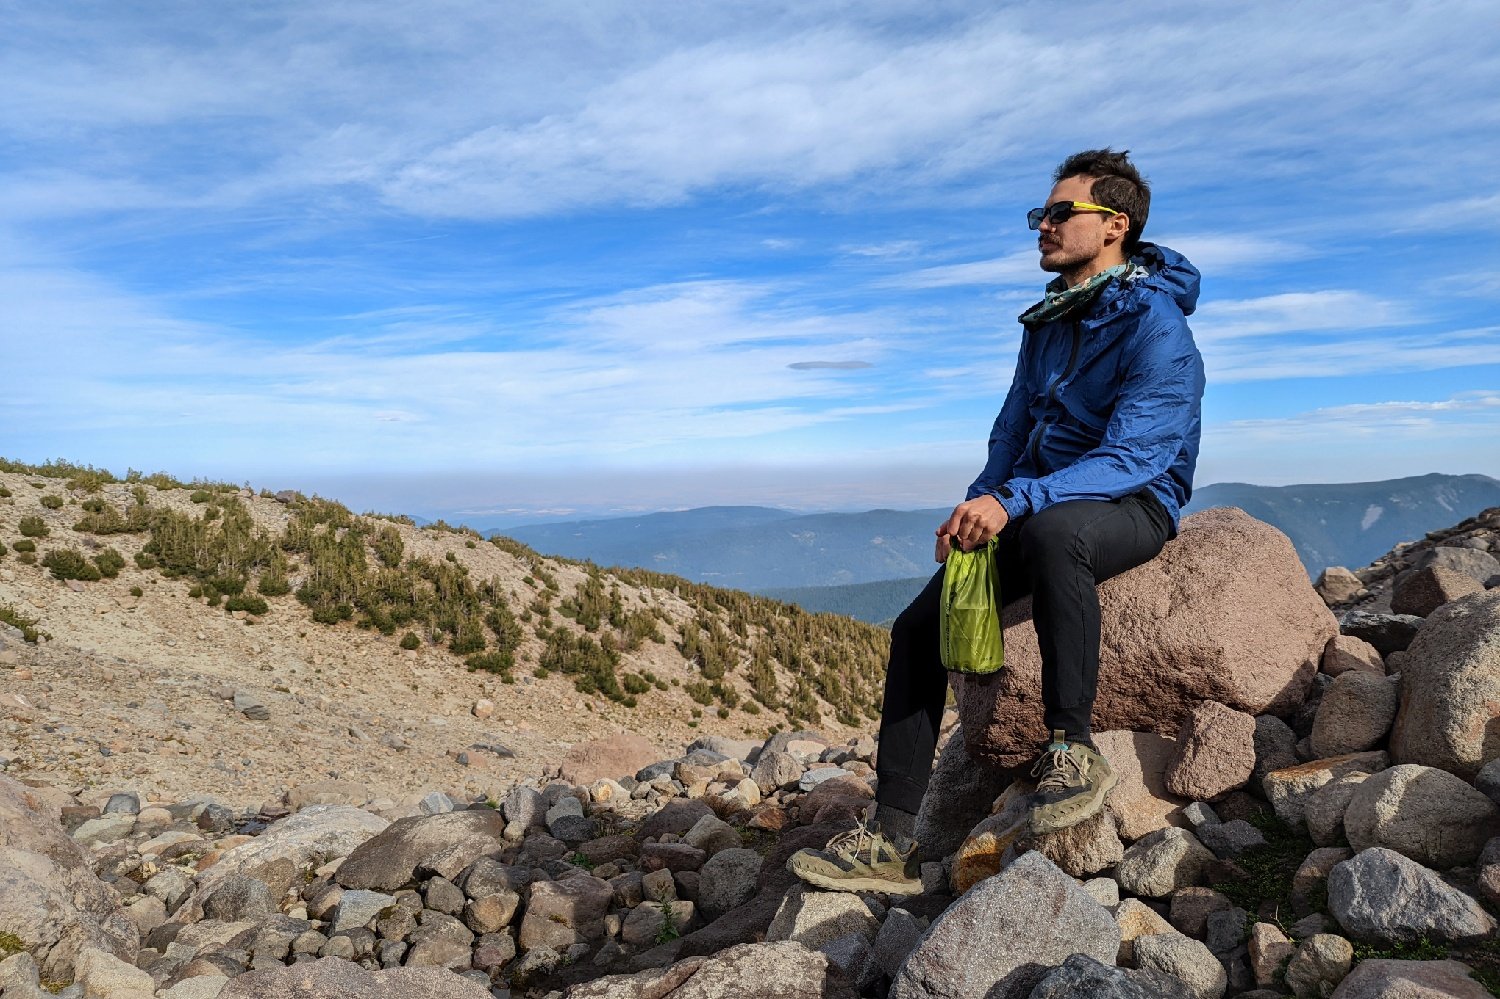 A hiker sitting on a rock in front of a mountain view wearing the Enlightened Equipment Visp rain jacket